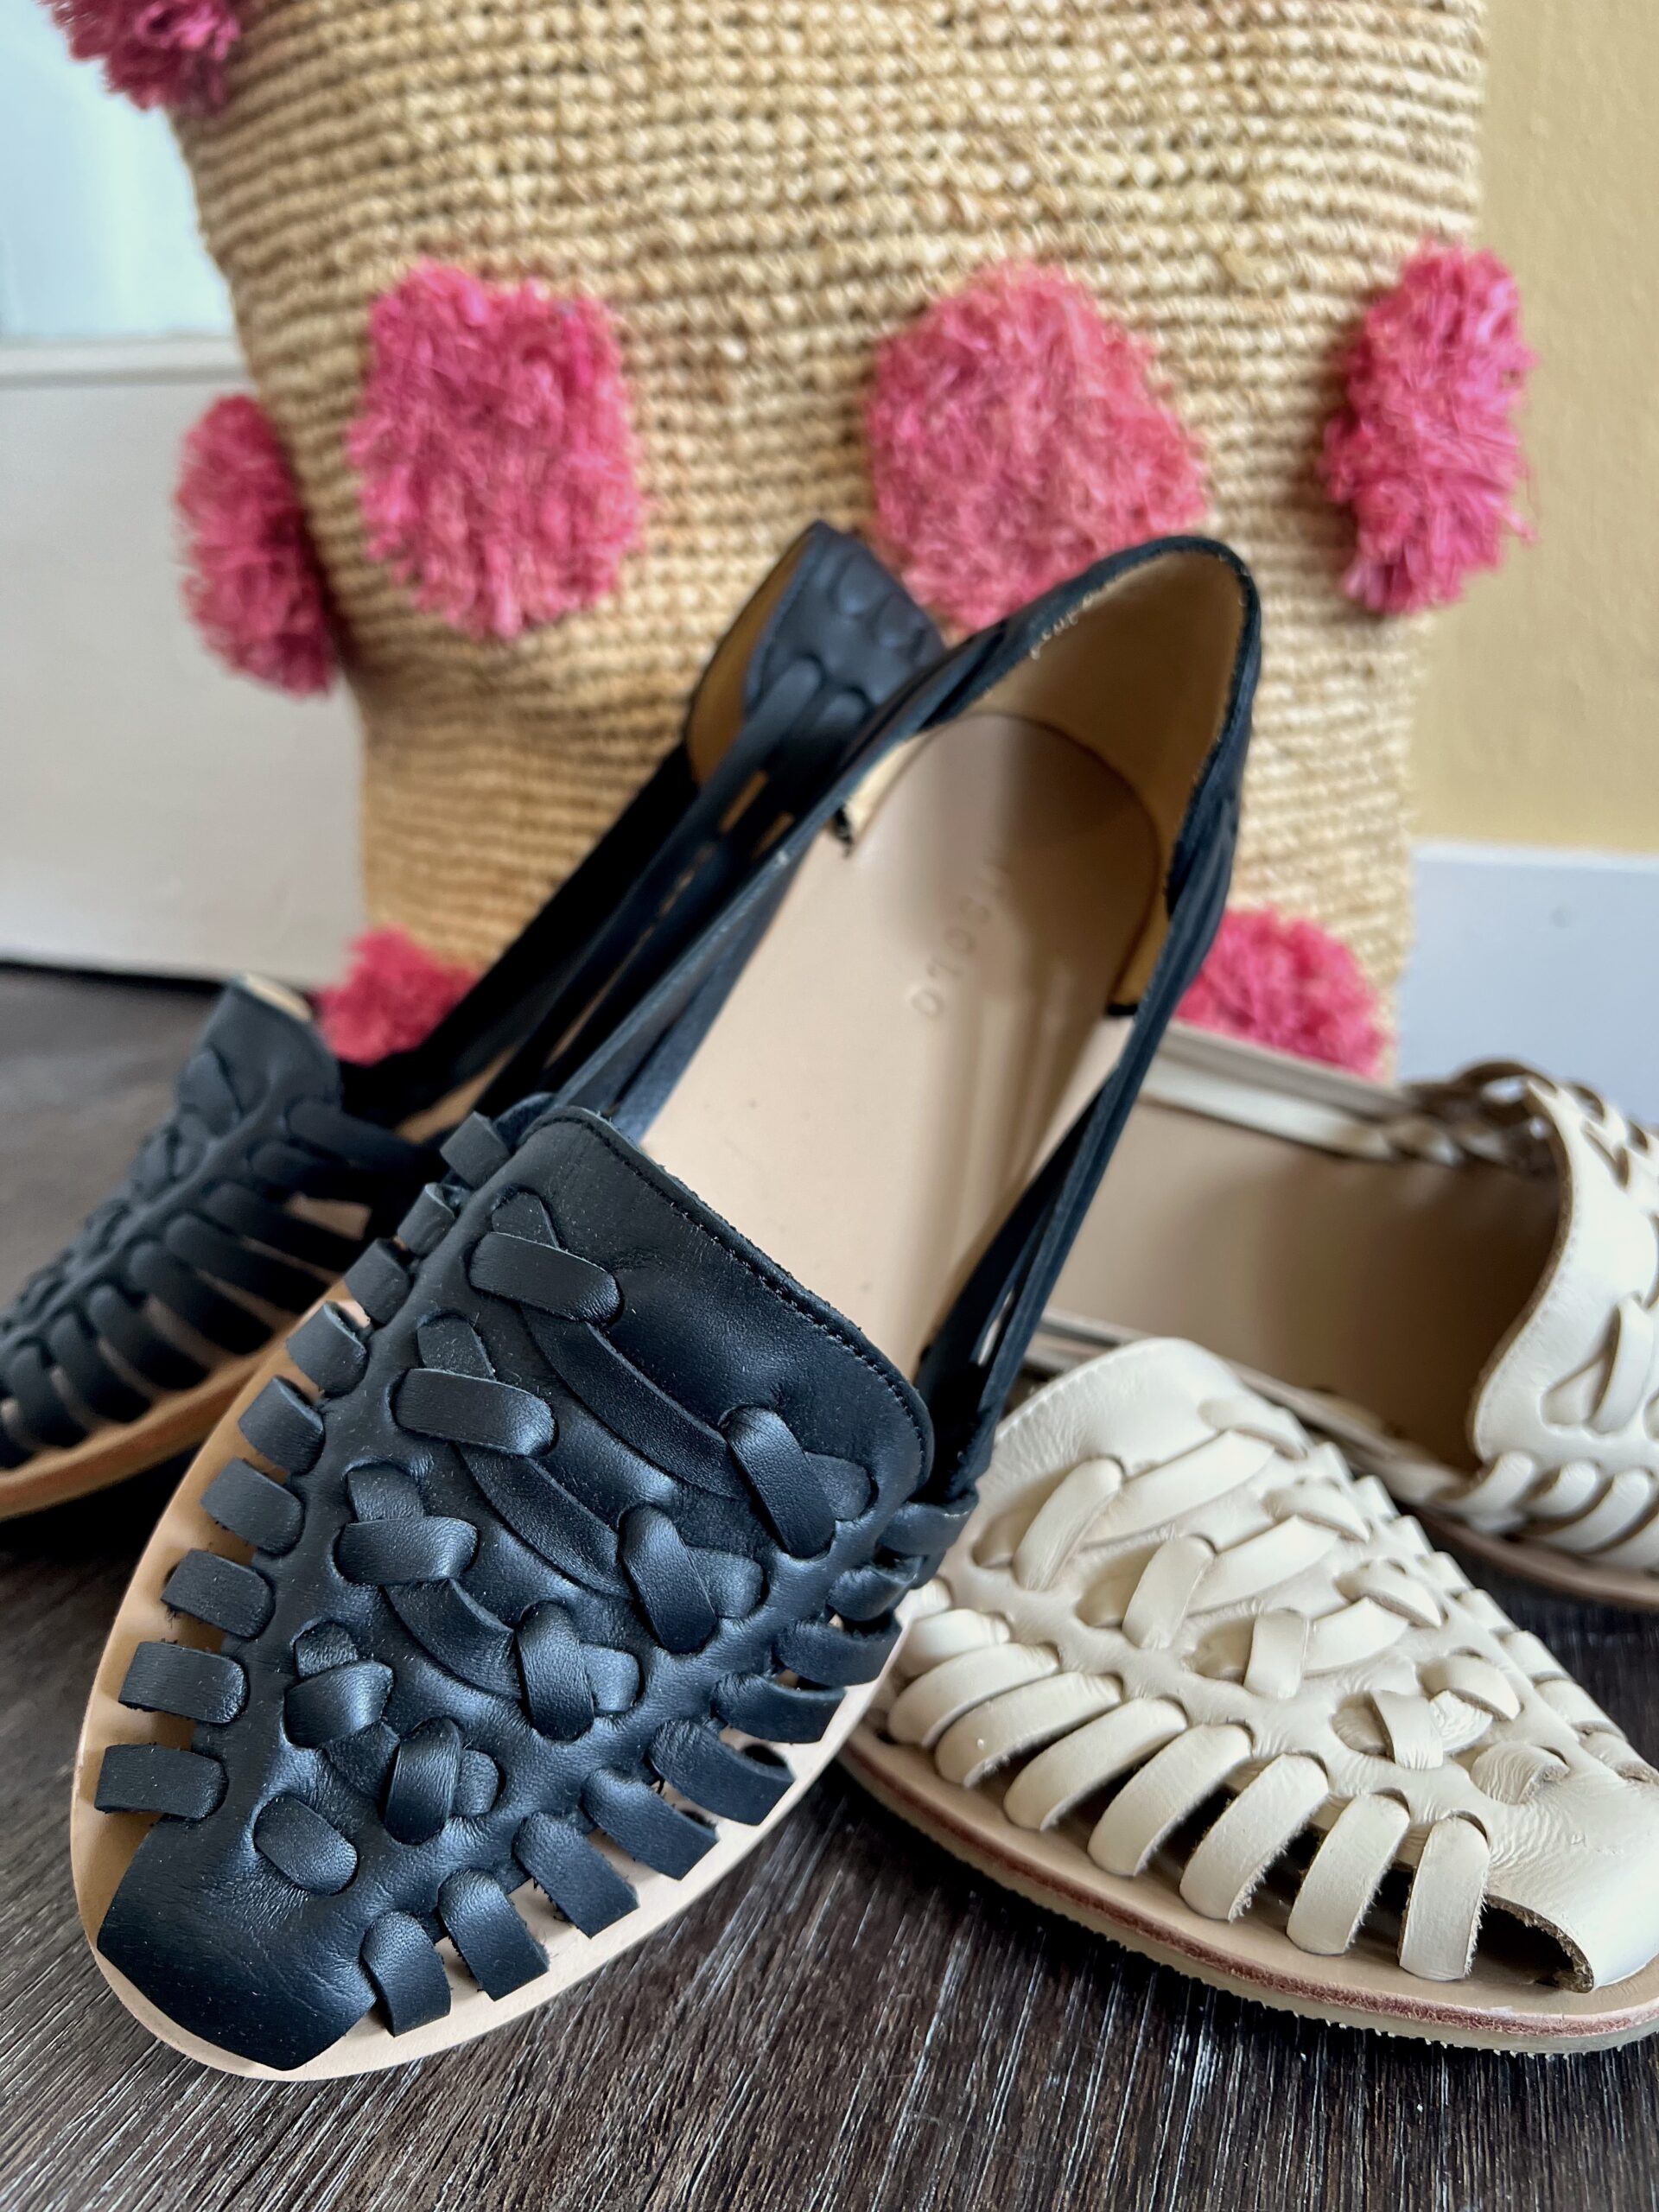 Two pairs of woven shoes, one black and one white, are placed on the floor in front of a woven basket with pink pom-poms. The chic display is reminiscent of traditional huarache sandals, adding a touch of artisanal elegance to the setting.